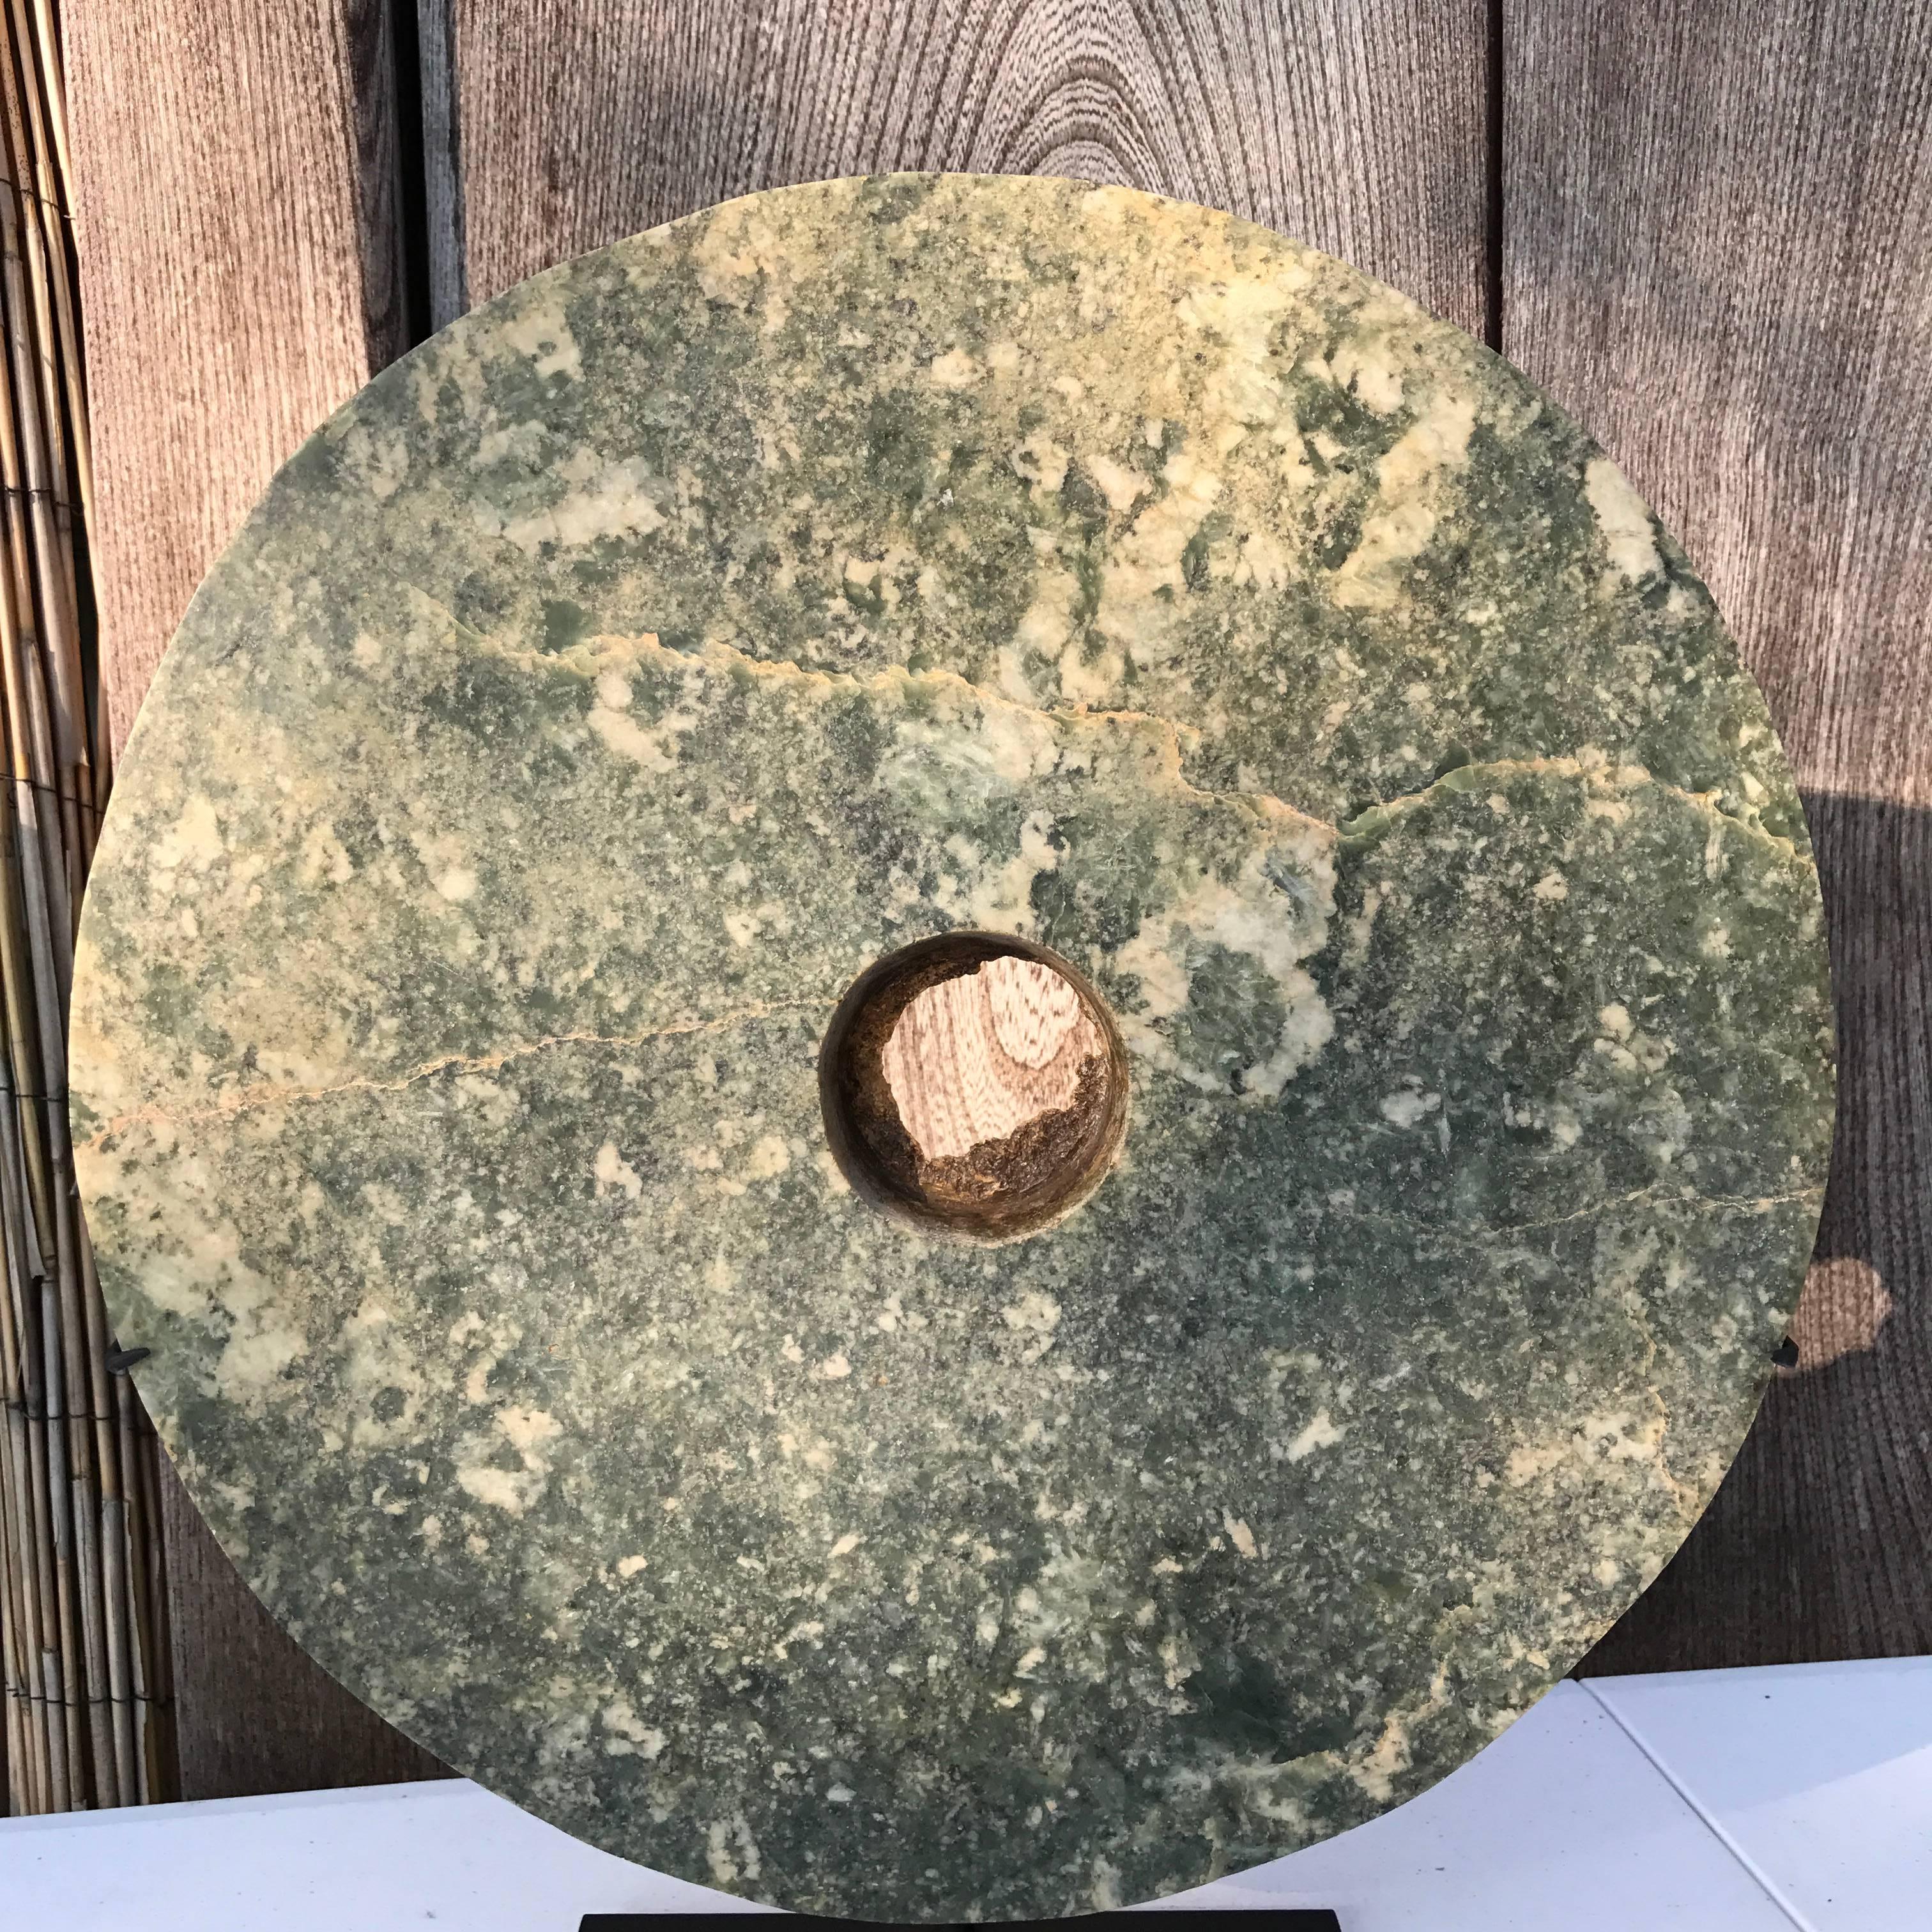 Ancient China, a large jade Bi disk measure: 14.75” diameter and .75” thick, Qijia culture (2200-1700 BCE)

Including Our Certificate of Authenticity

The thick round heavenly ritual jade of a medium mottled green jade stone partially altered and